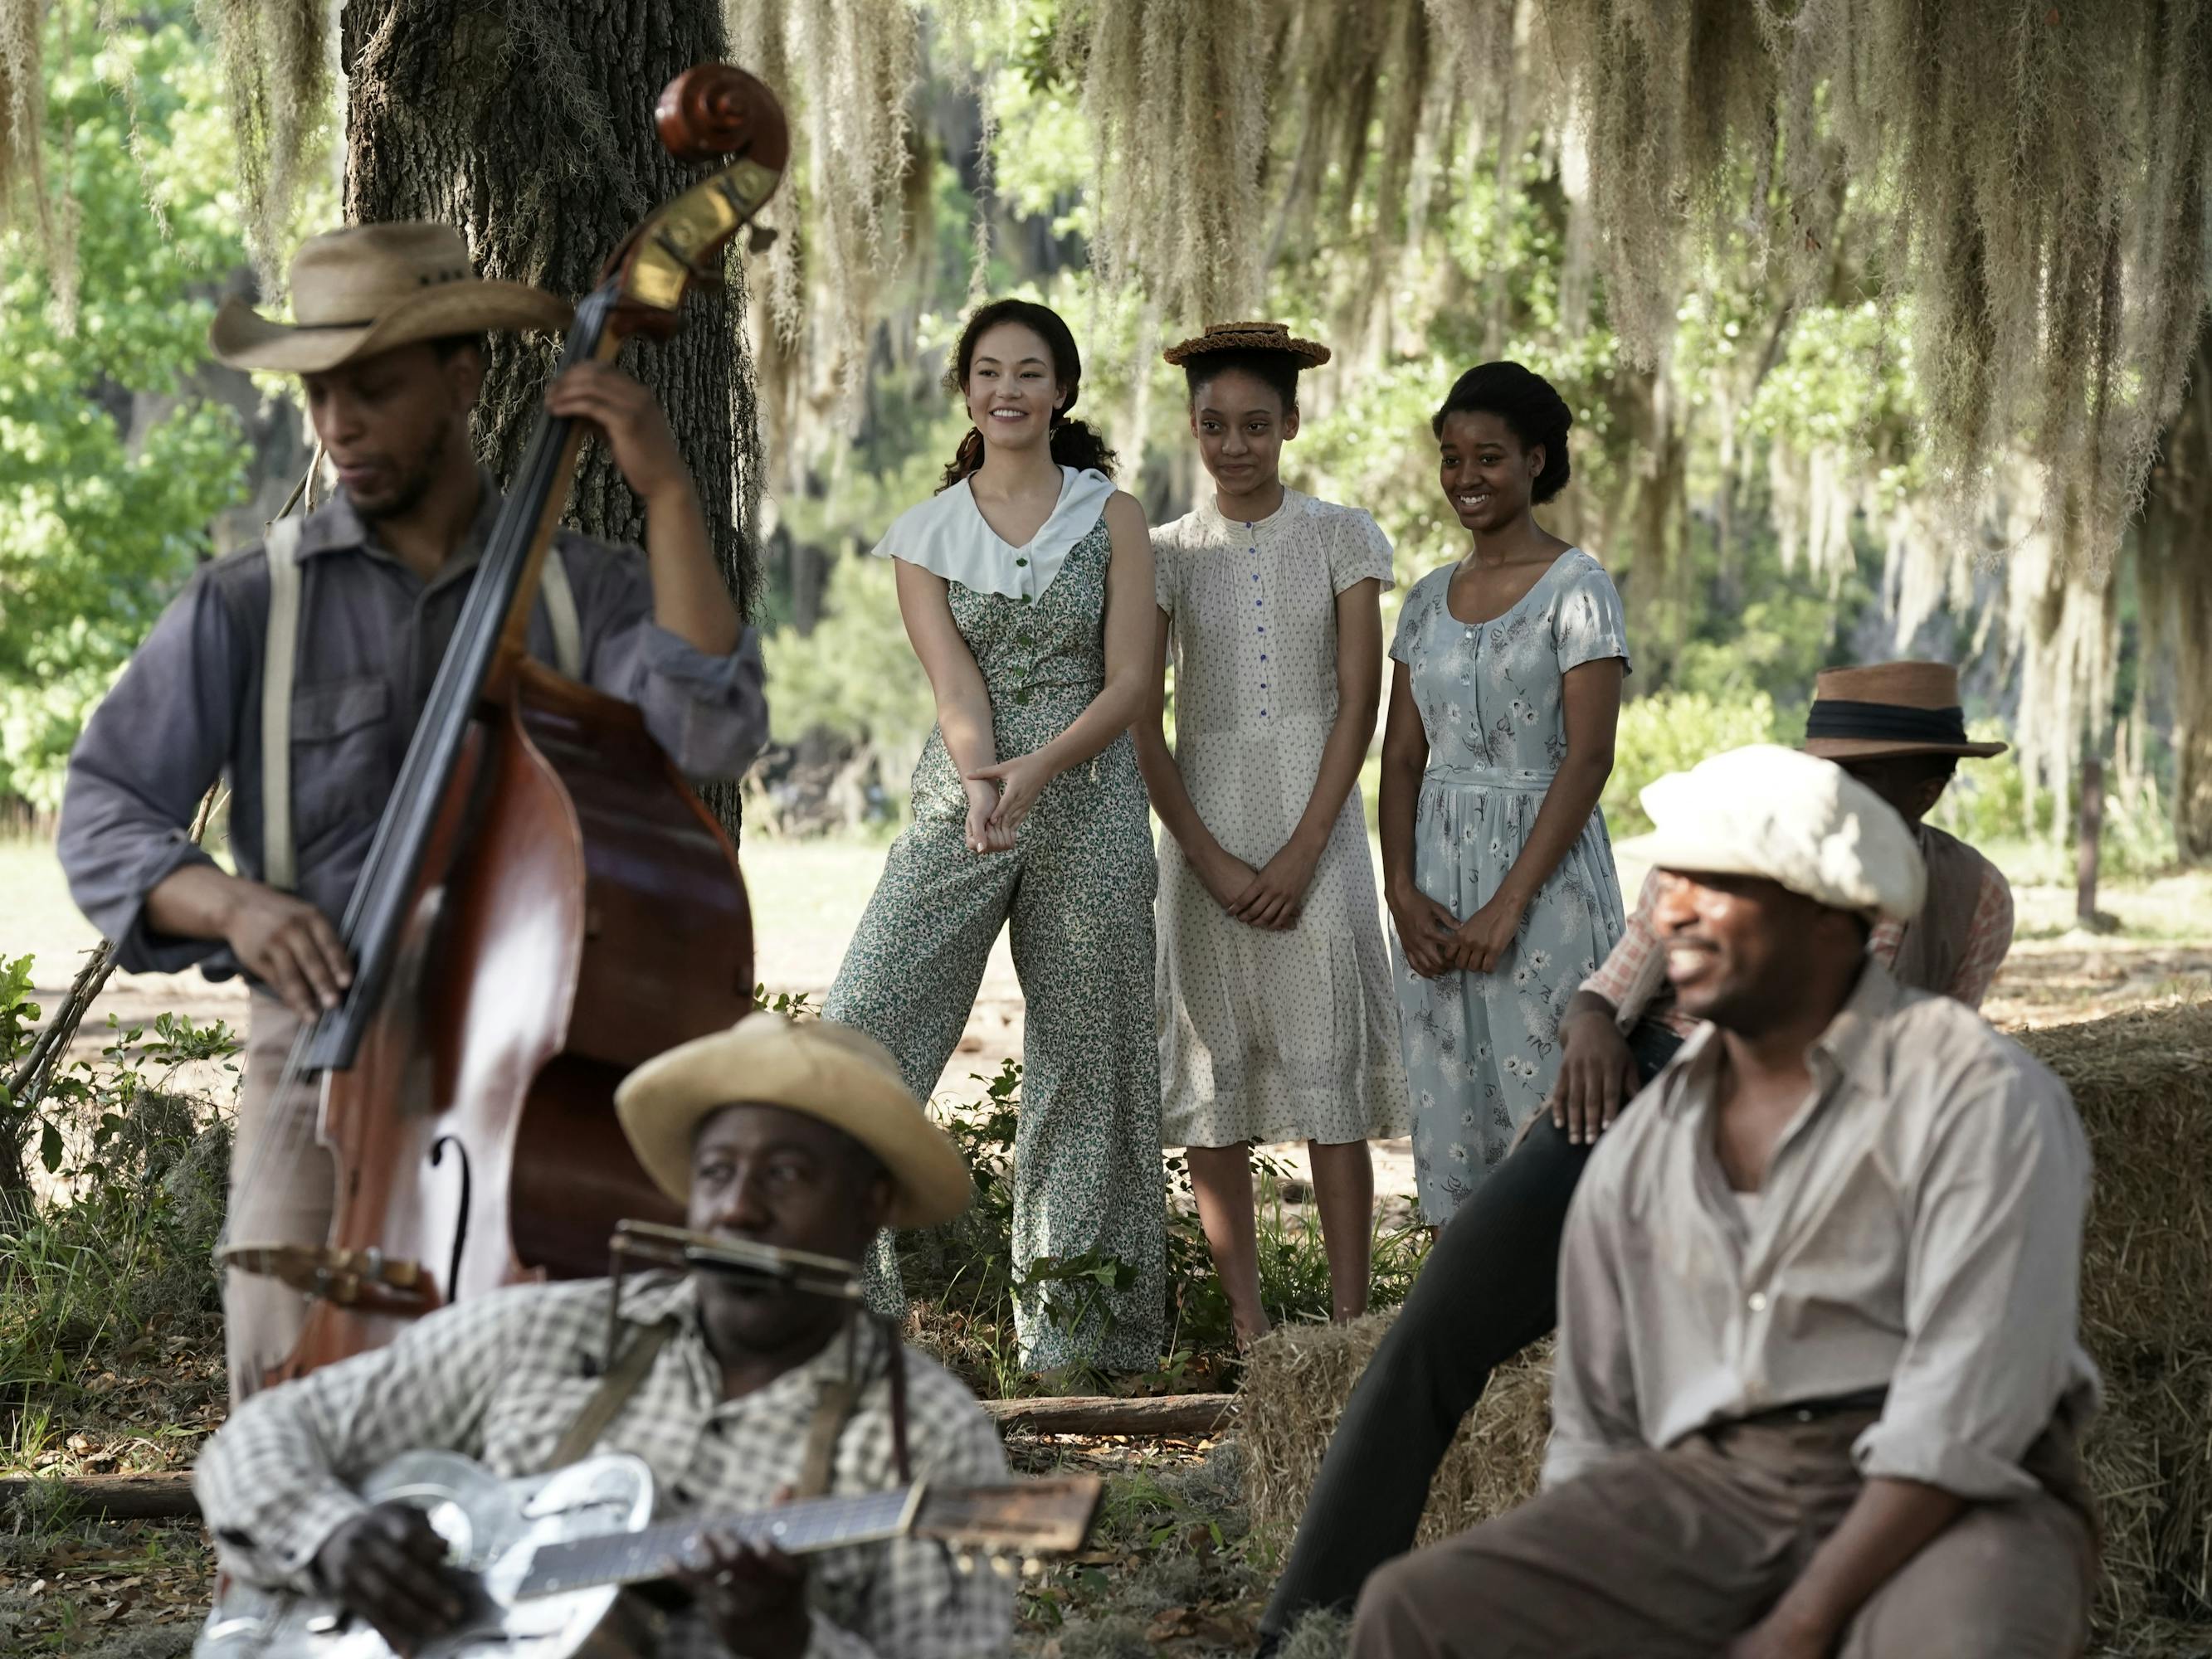 Leanne (Solea Pfeiffer) and a musical trio stand underneath a weeping willow in a soft light.